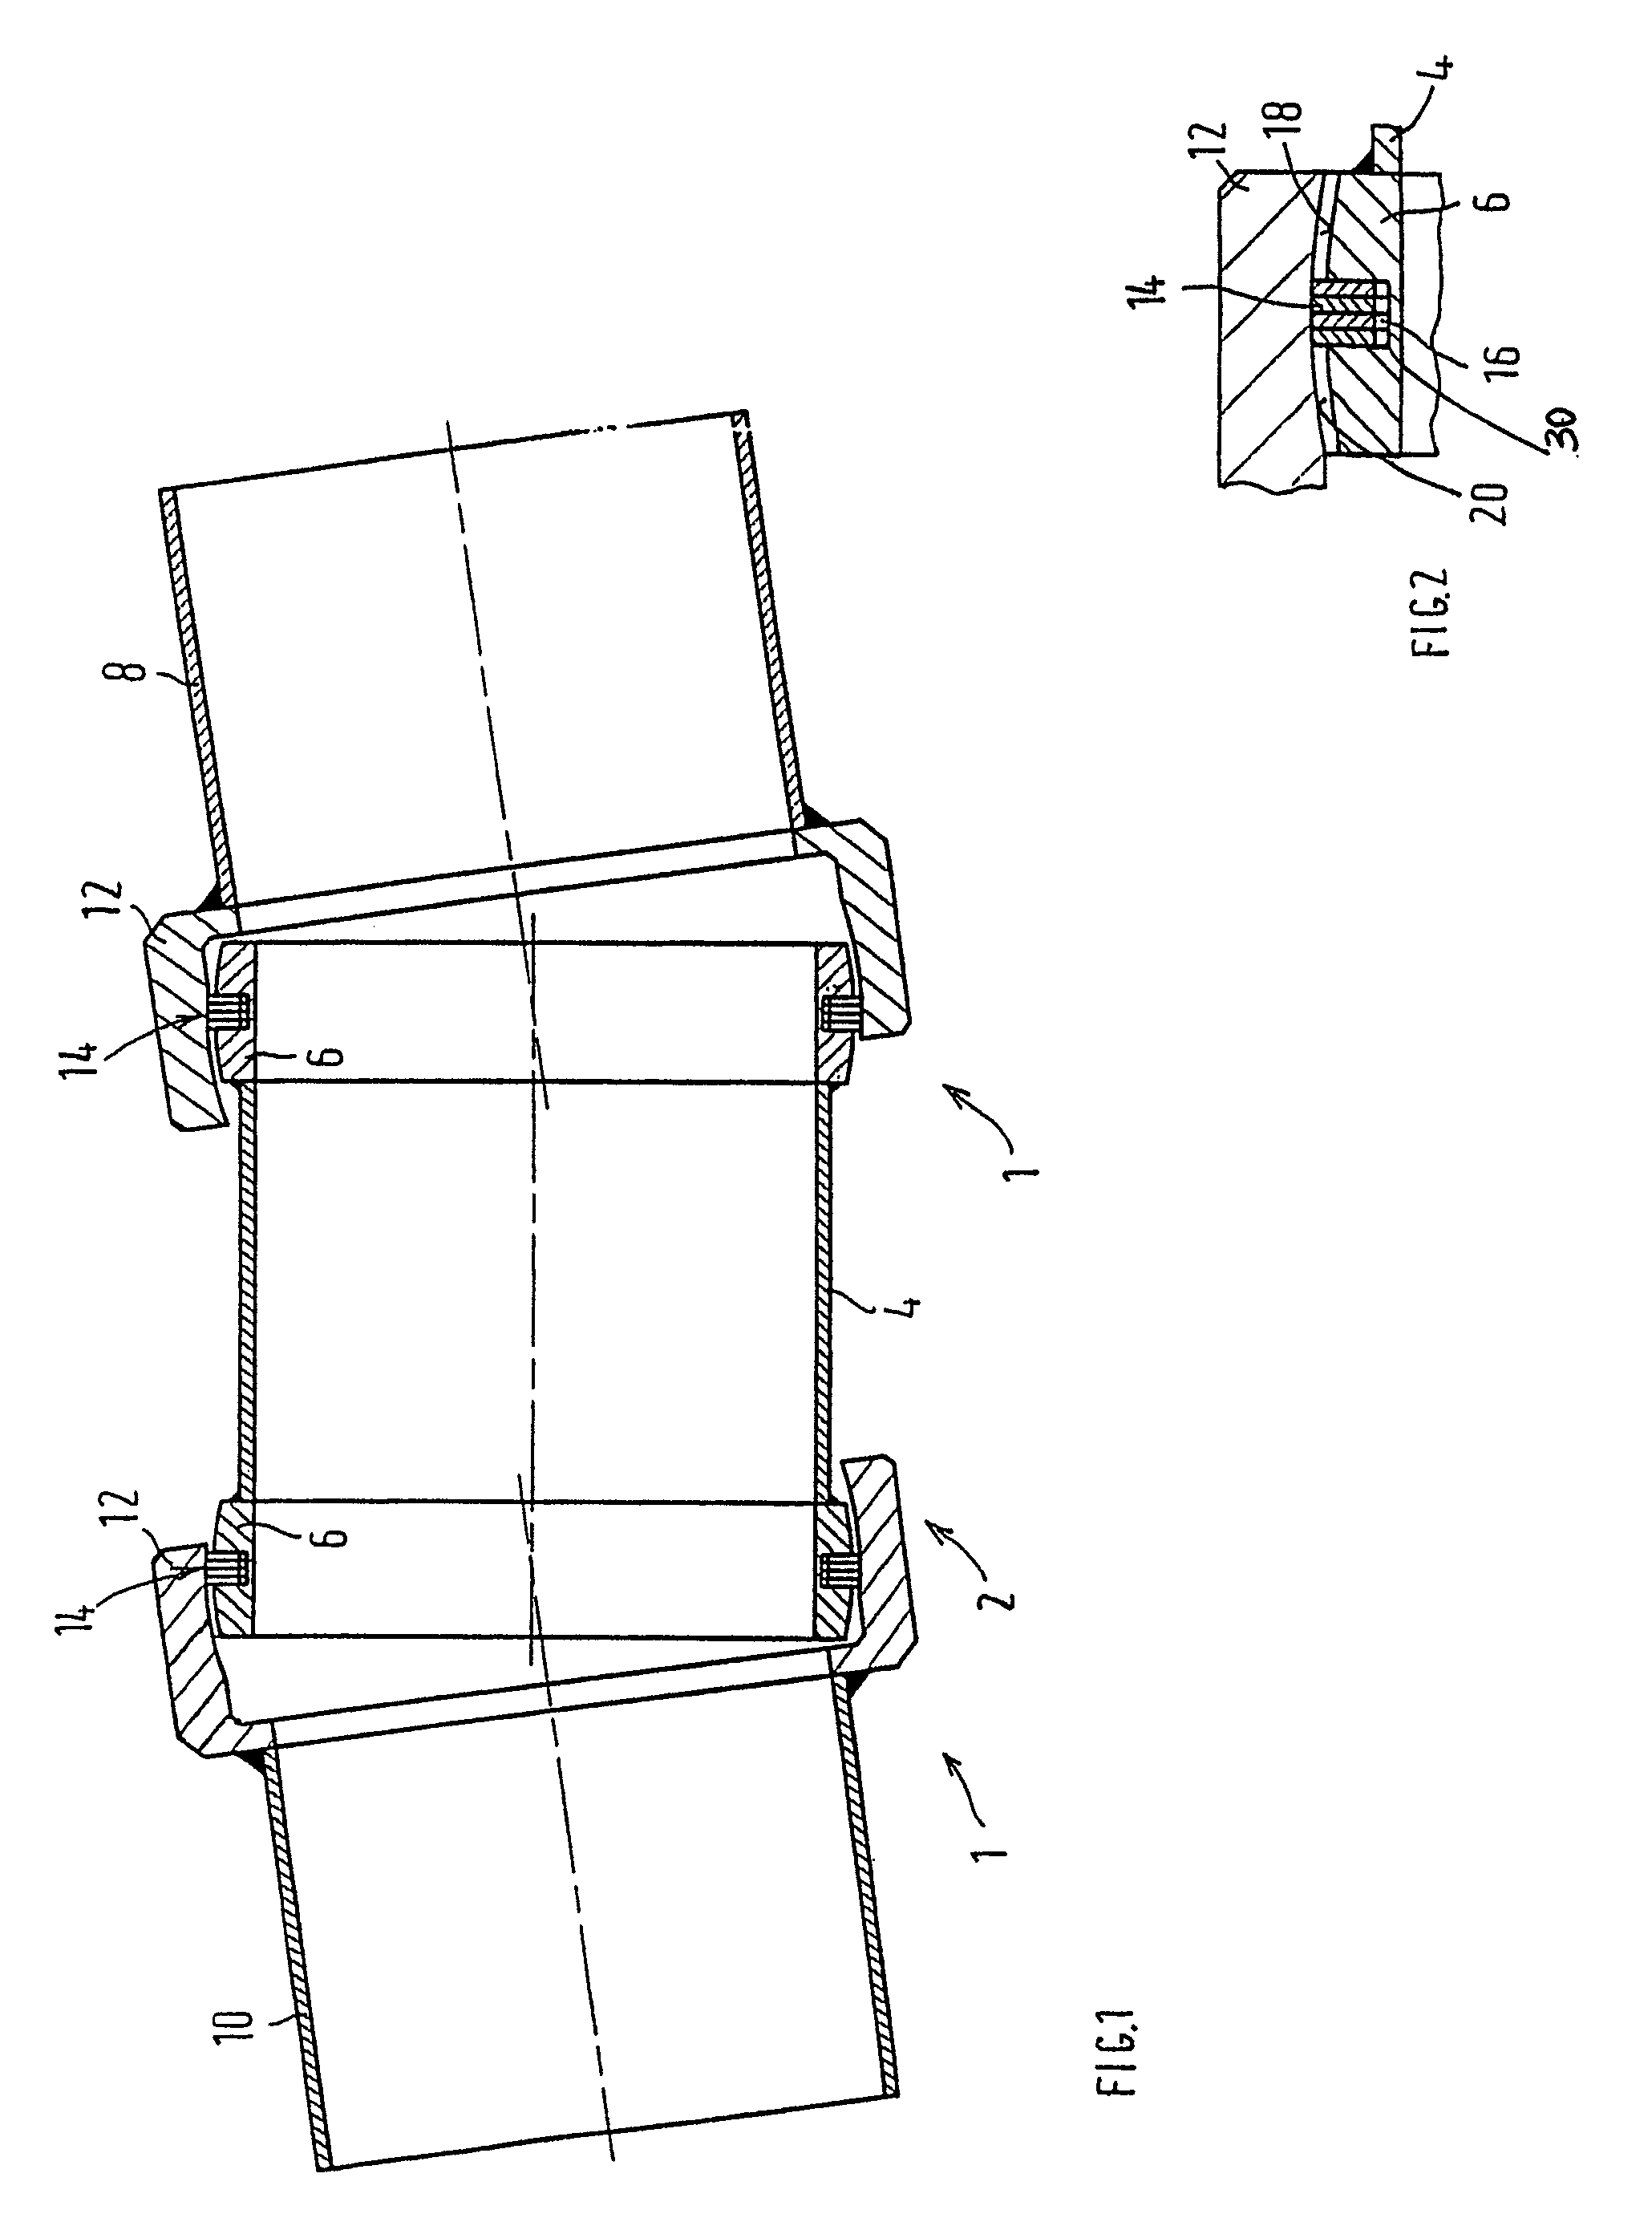 Axial and radial play and angle compensation of a tolerating pipe connection